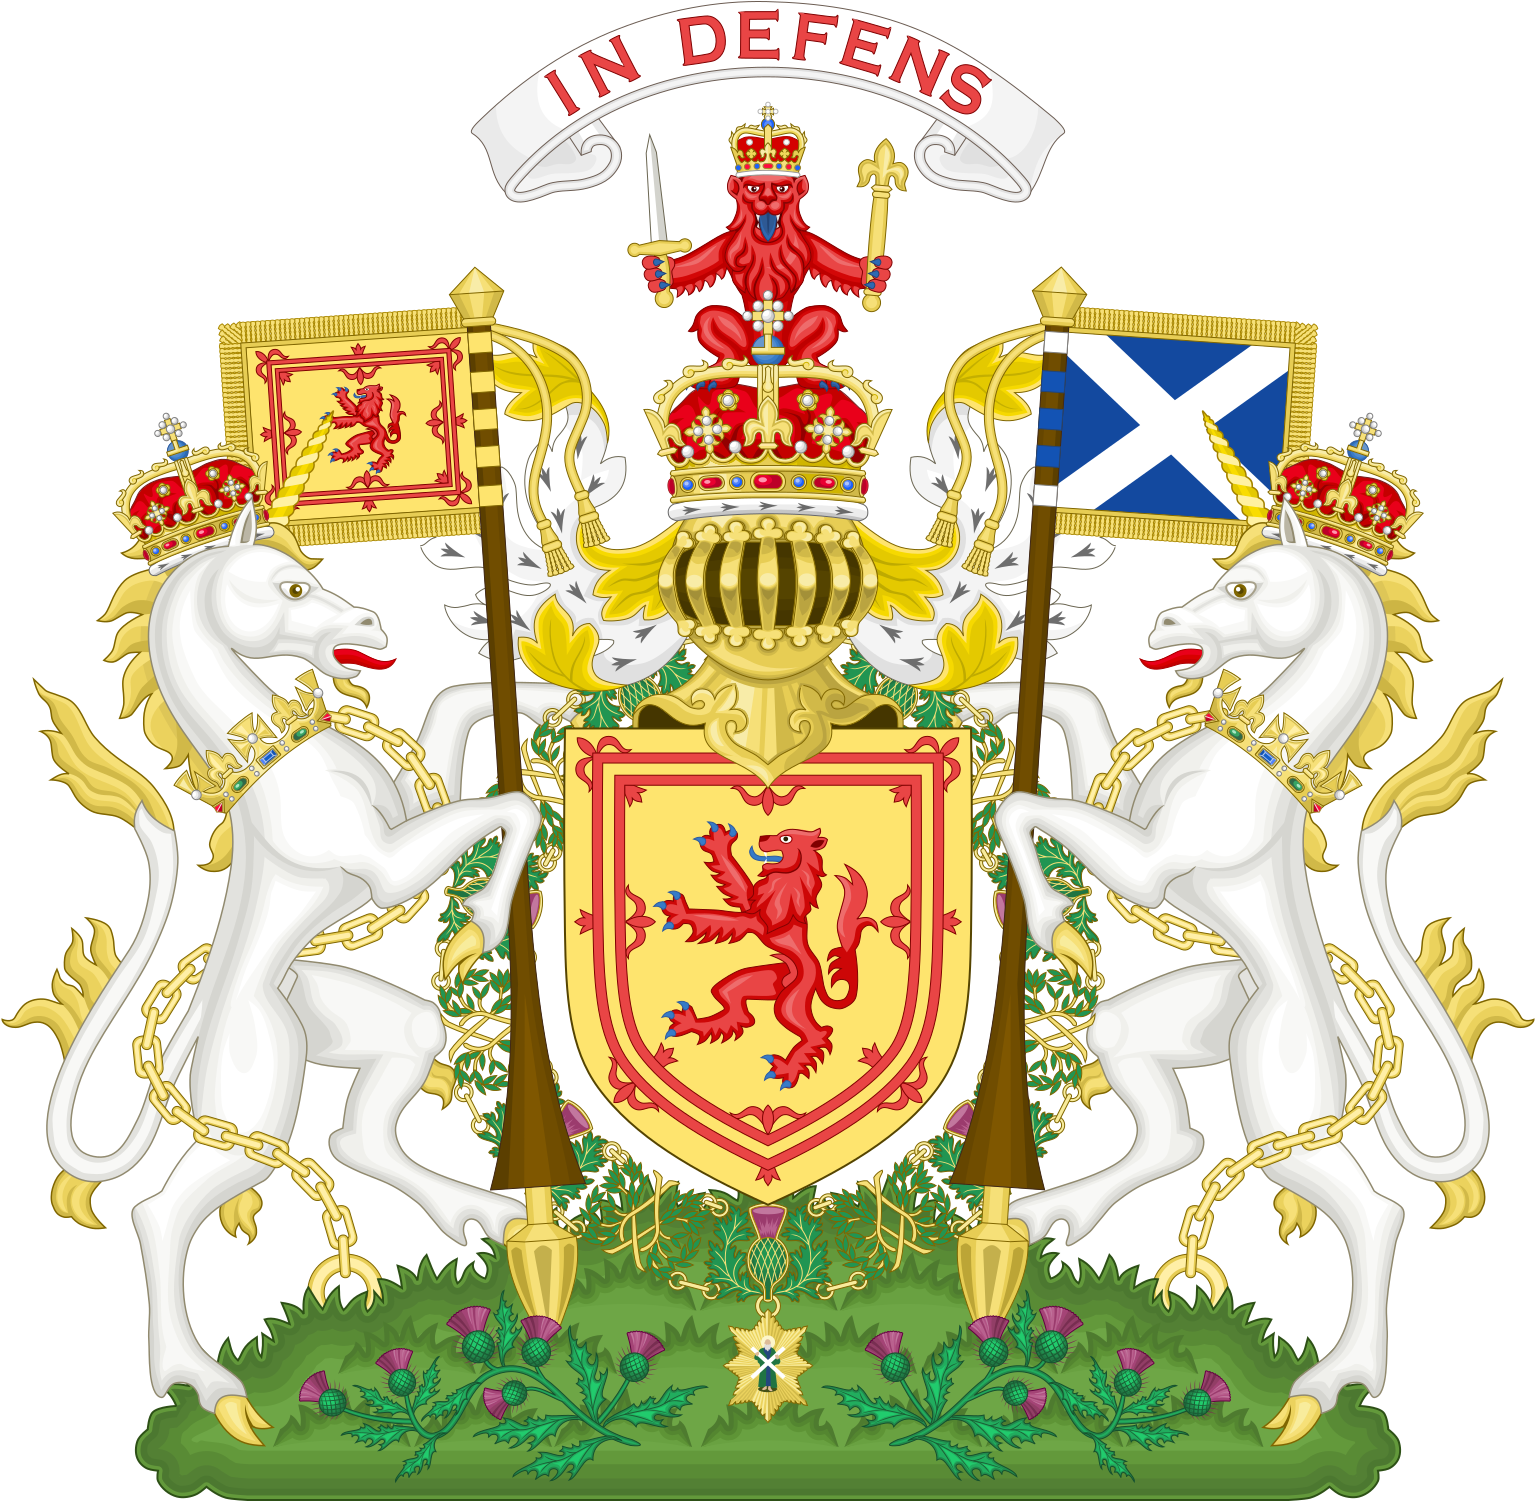 A Coat Of Arms With Horses And Flags